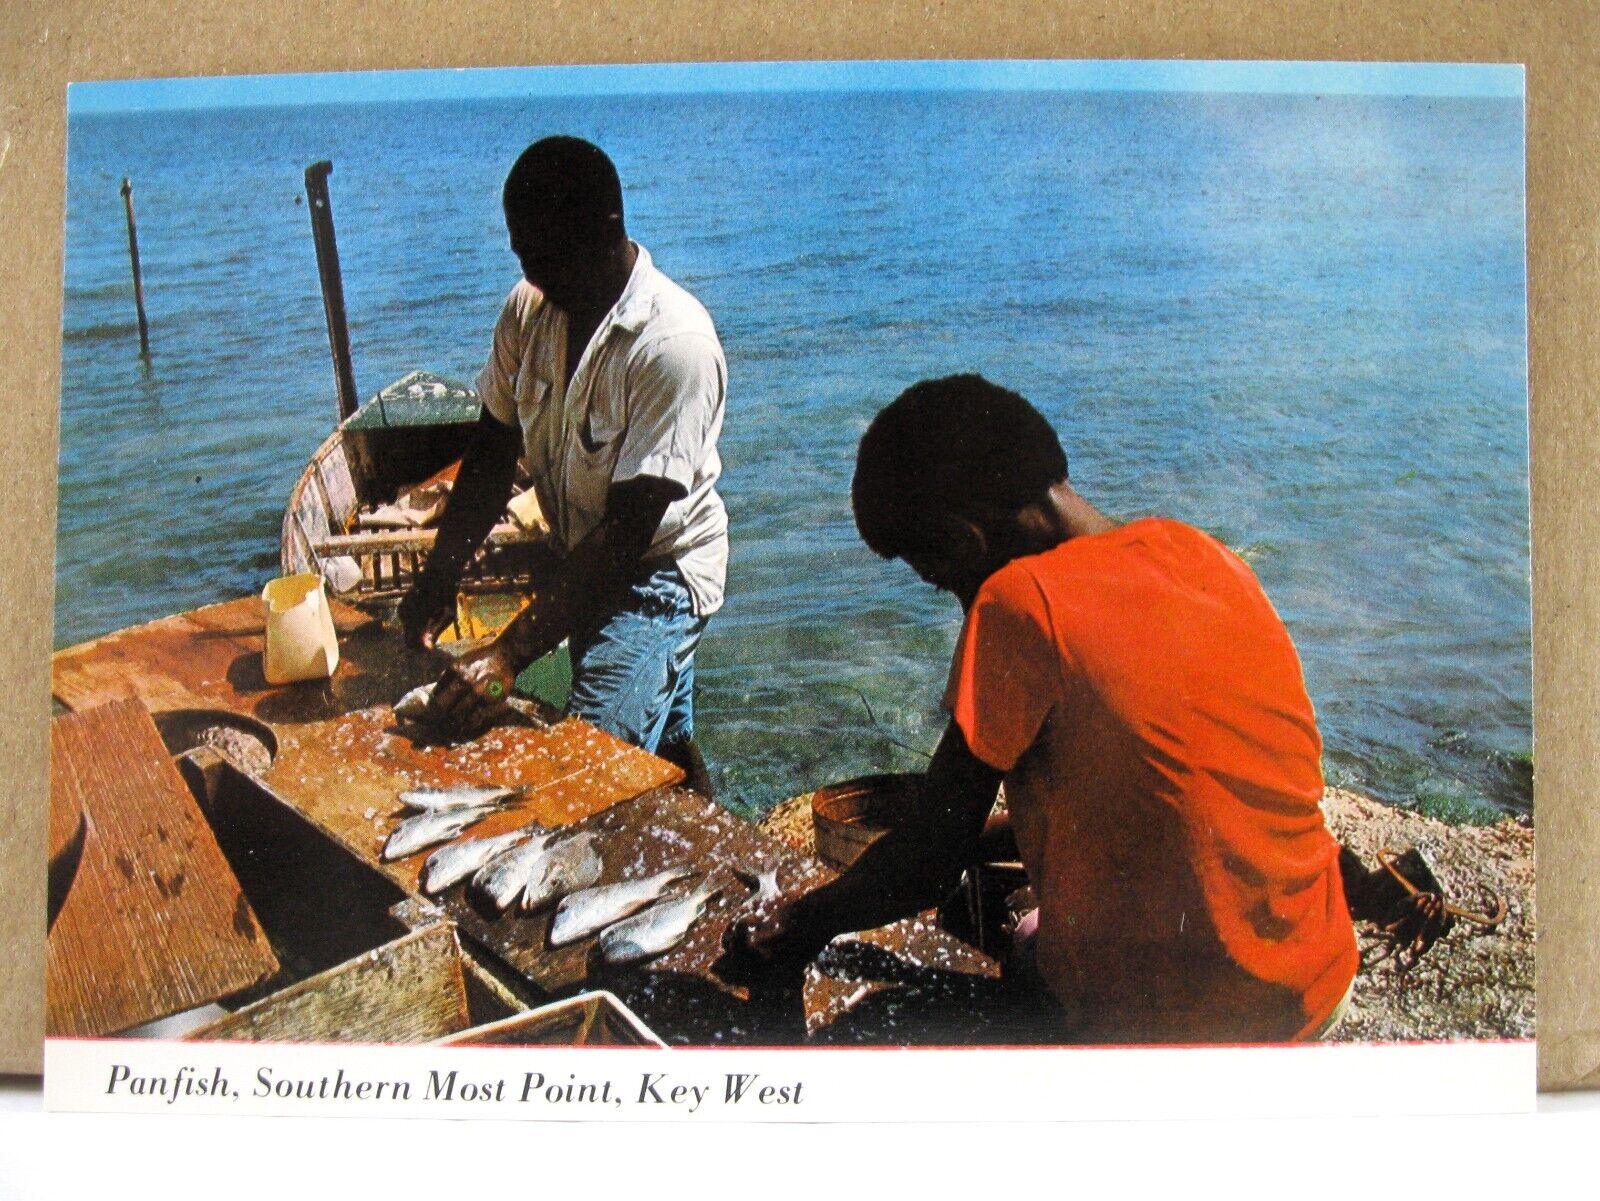 Key West - cleaning Panfish - Southern Most Point old postcard - grits & grunts